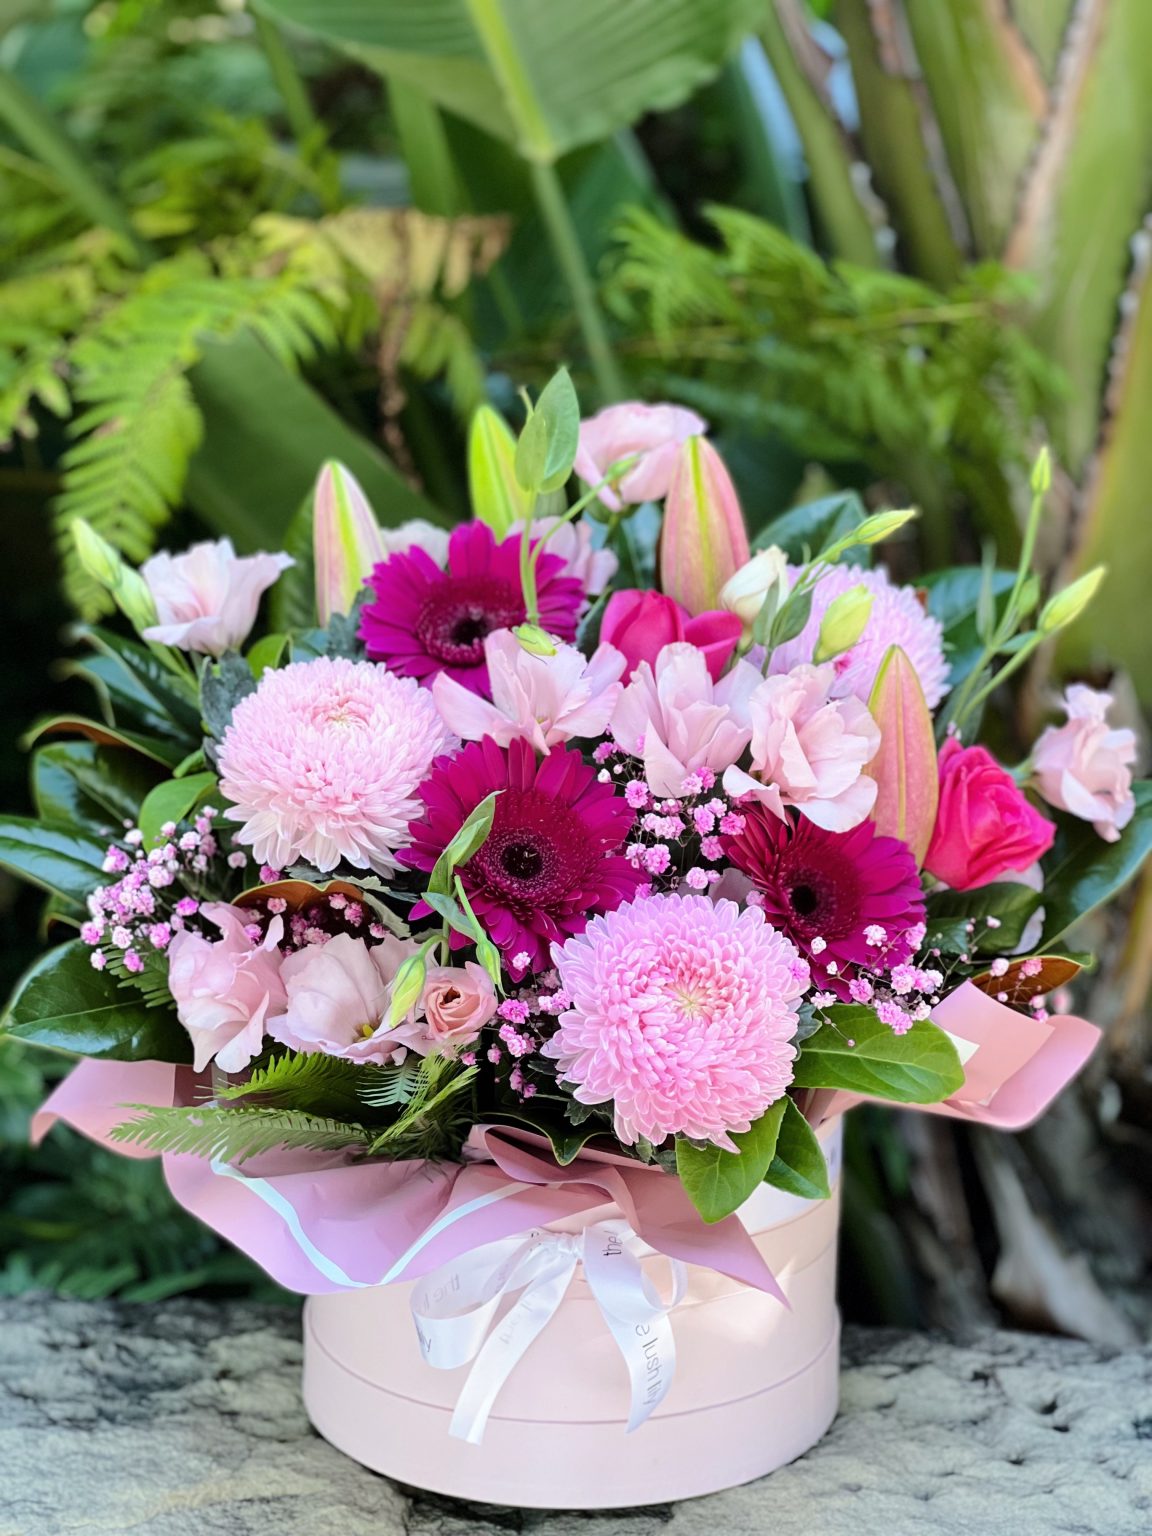 Vivienne The Lush Lily Brisbane And Gold Coast Florist Flower Delivery Carindale Loganholme